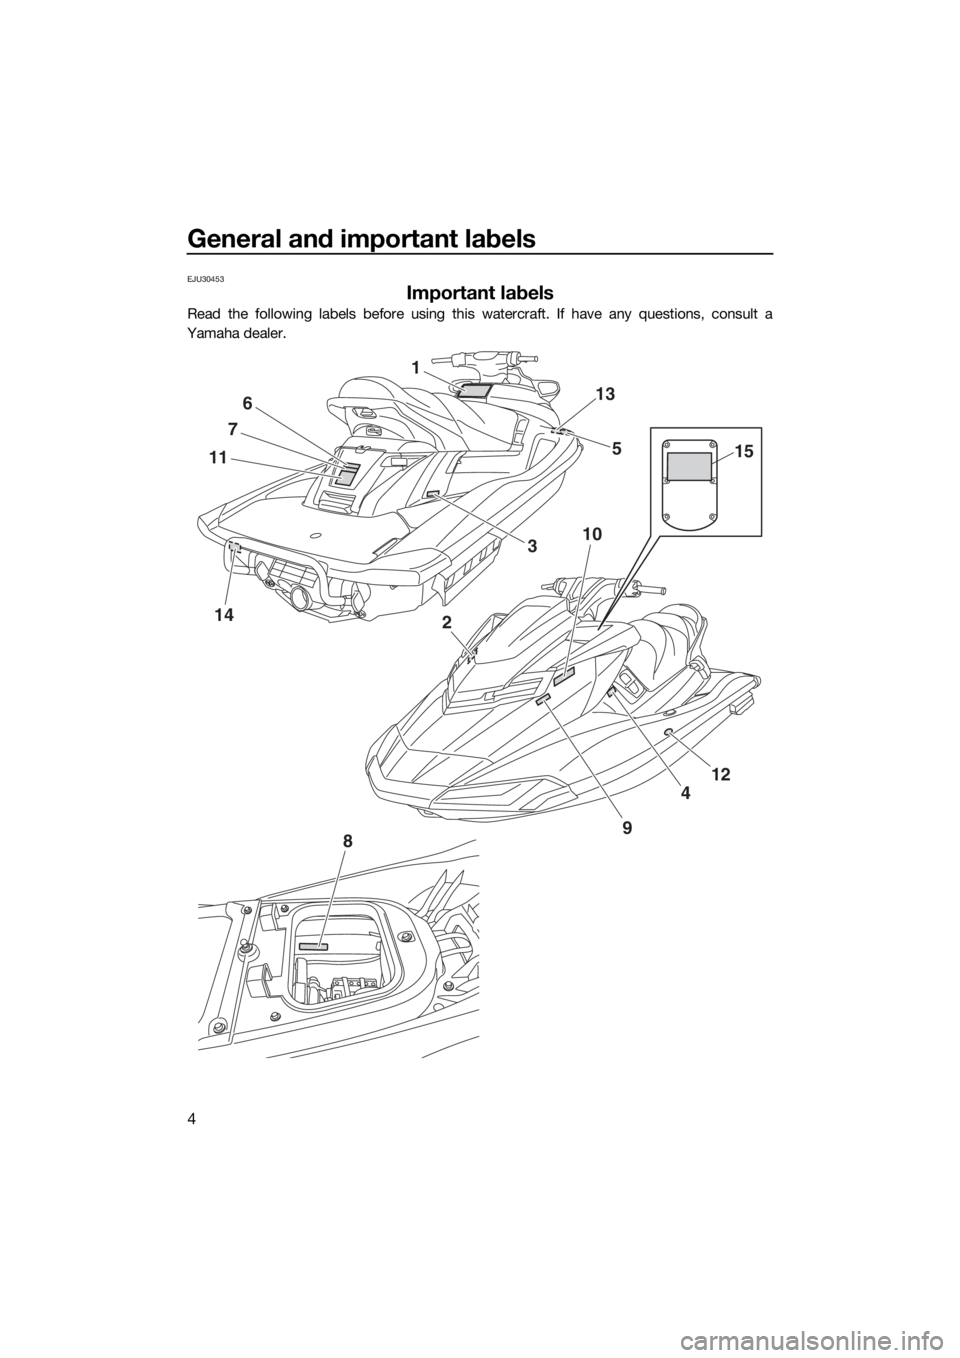 YAMAHA FX SVHO 2016  Owners Manual General and important labels
4
EJU30453
Important labels
Read the following labels before using this watercraft. If have any questions, consult a
Yamaha dealer.
14
1
11
7
6
10
2
8
4
12
9
13
5
3
15
UF3